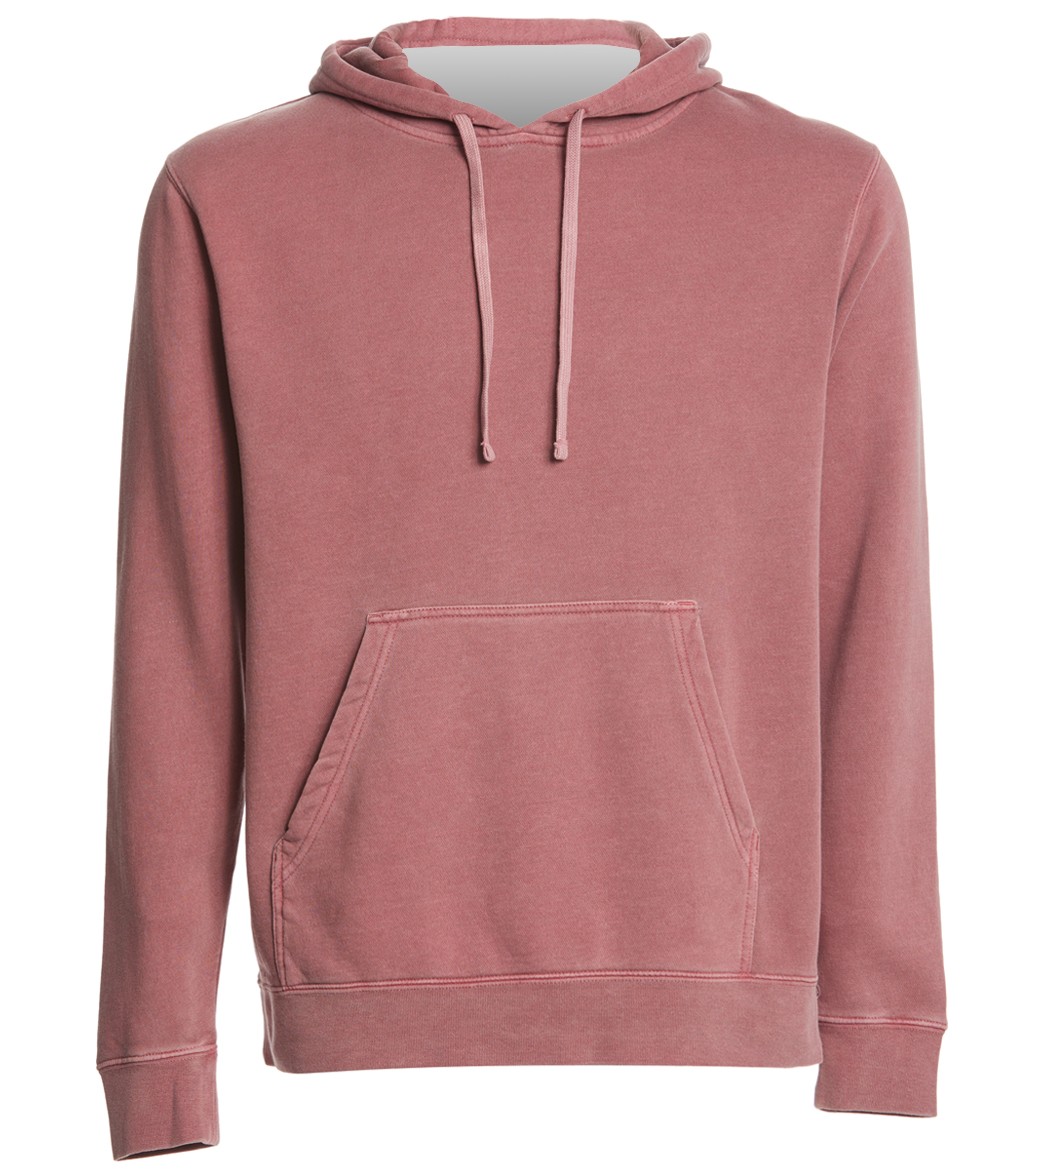 Men's Midweight Pigment Dyed Hooded Sweatshirt - Maroon Medium Cotton/Polyester - Swimoutlet.com